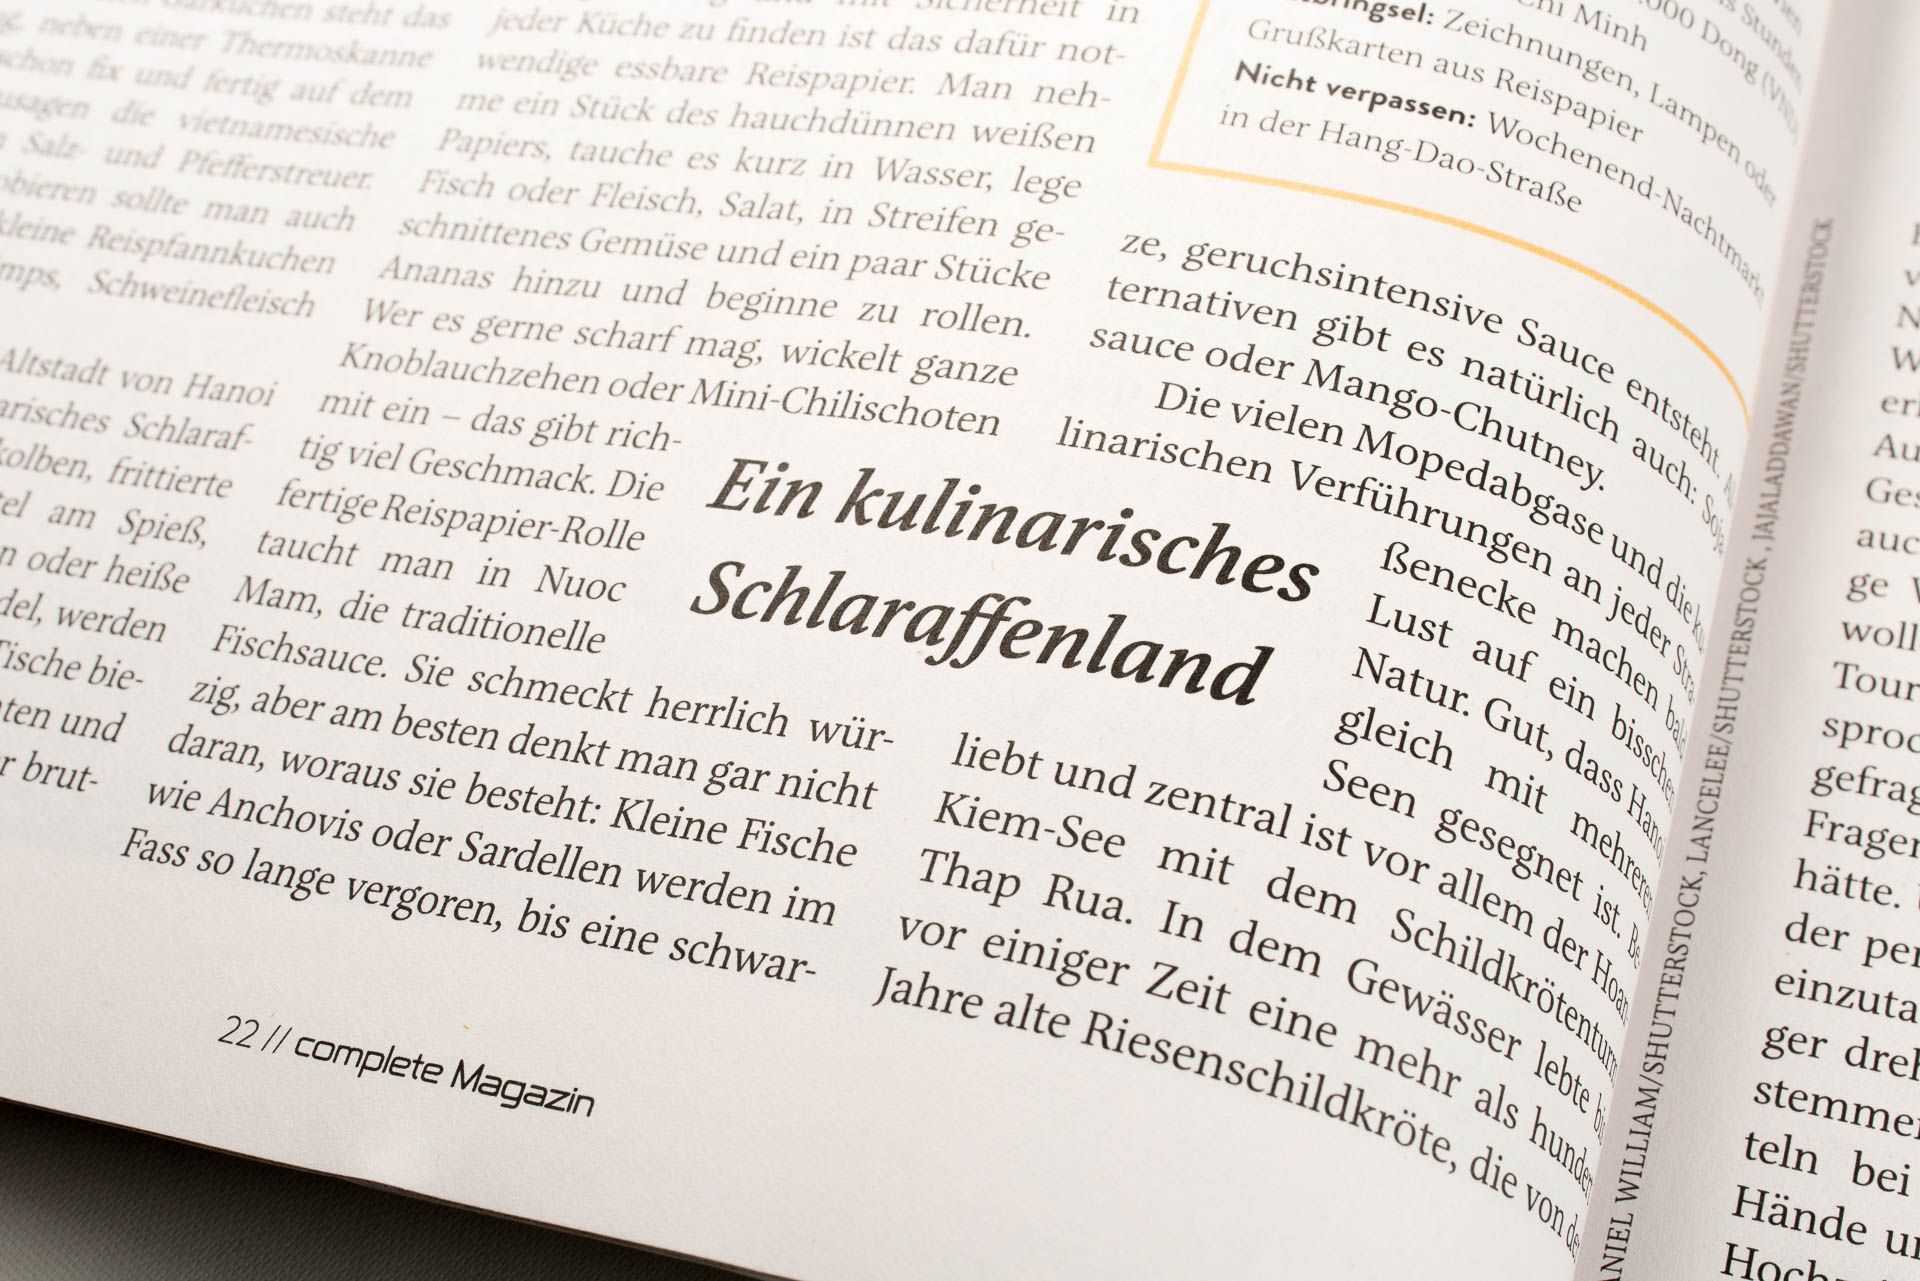 Liber Font in use